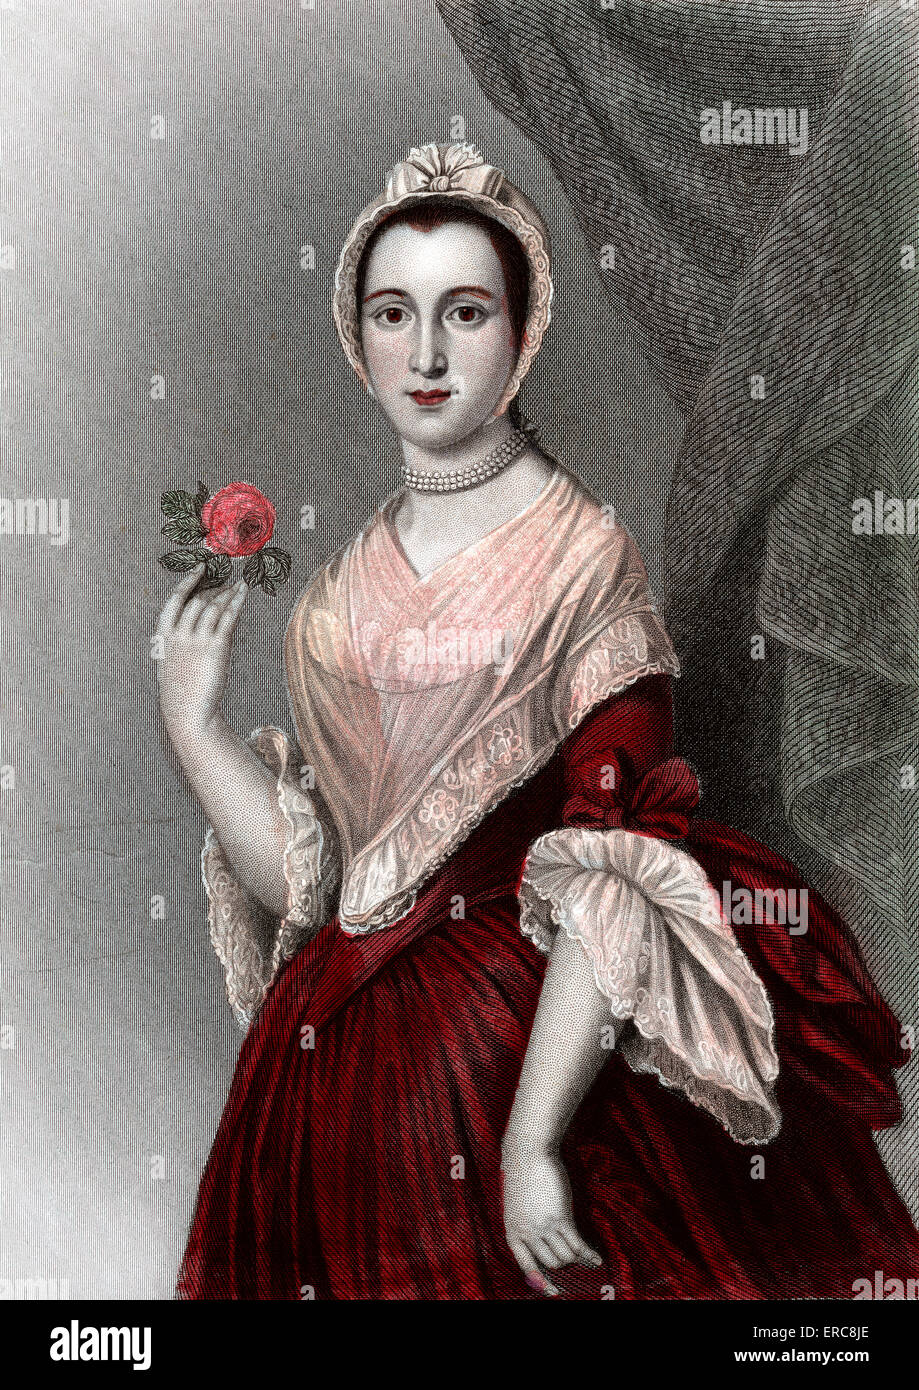 1700s 1750s JANE KETELTAS BEEKMAN WIFE OF JAMES BEEKMAN WEALTHY NEW YORKER WEARING PINK DRESS WITH RED SHAWL HOLDING RED ROSE Stock Photo